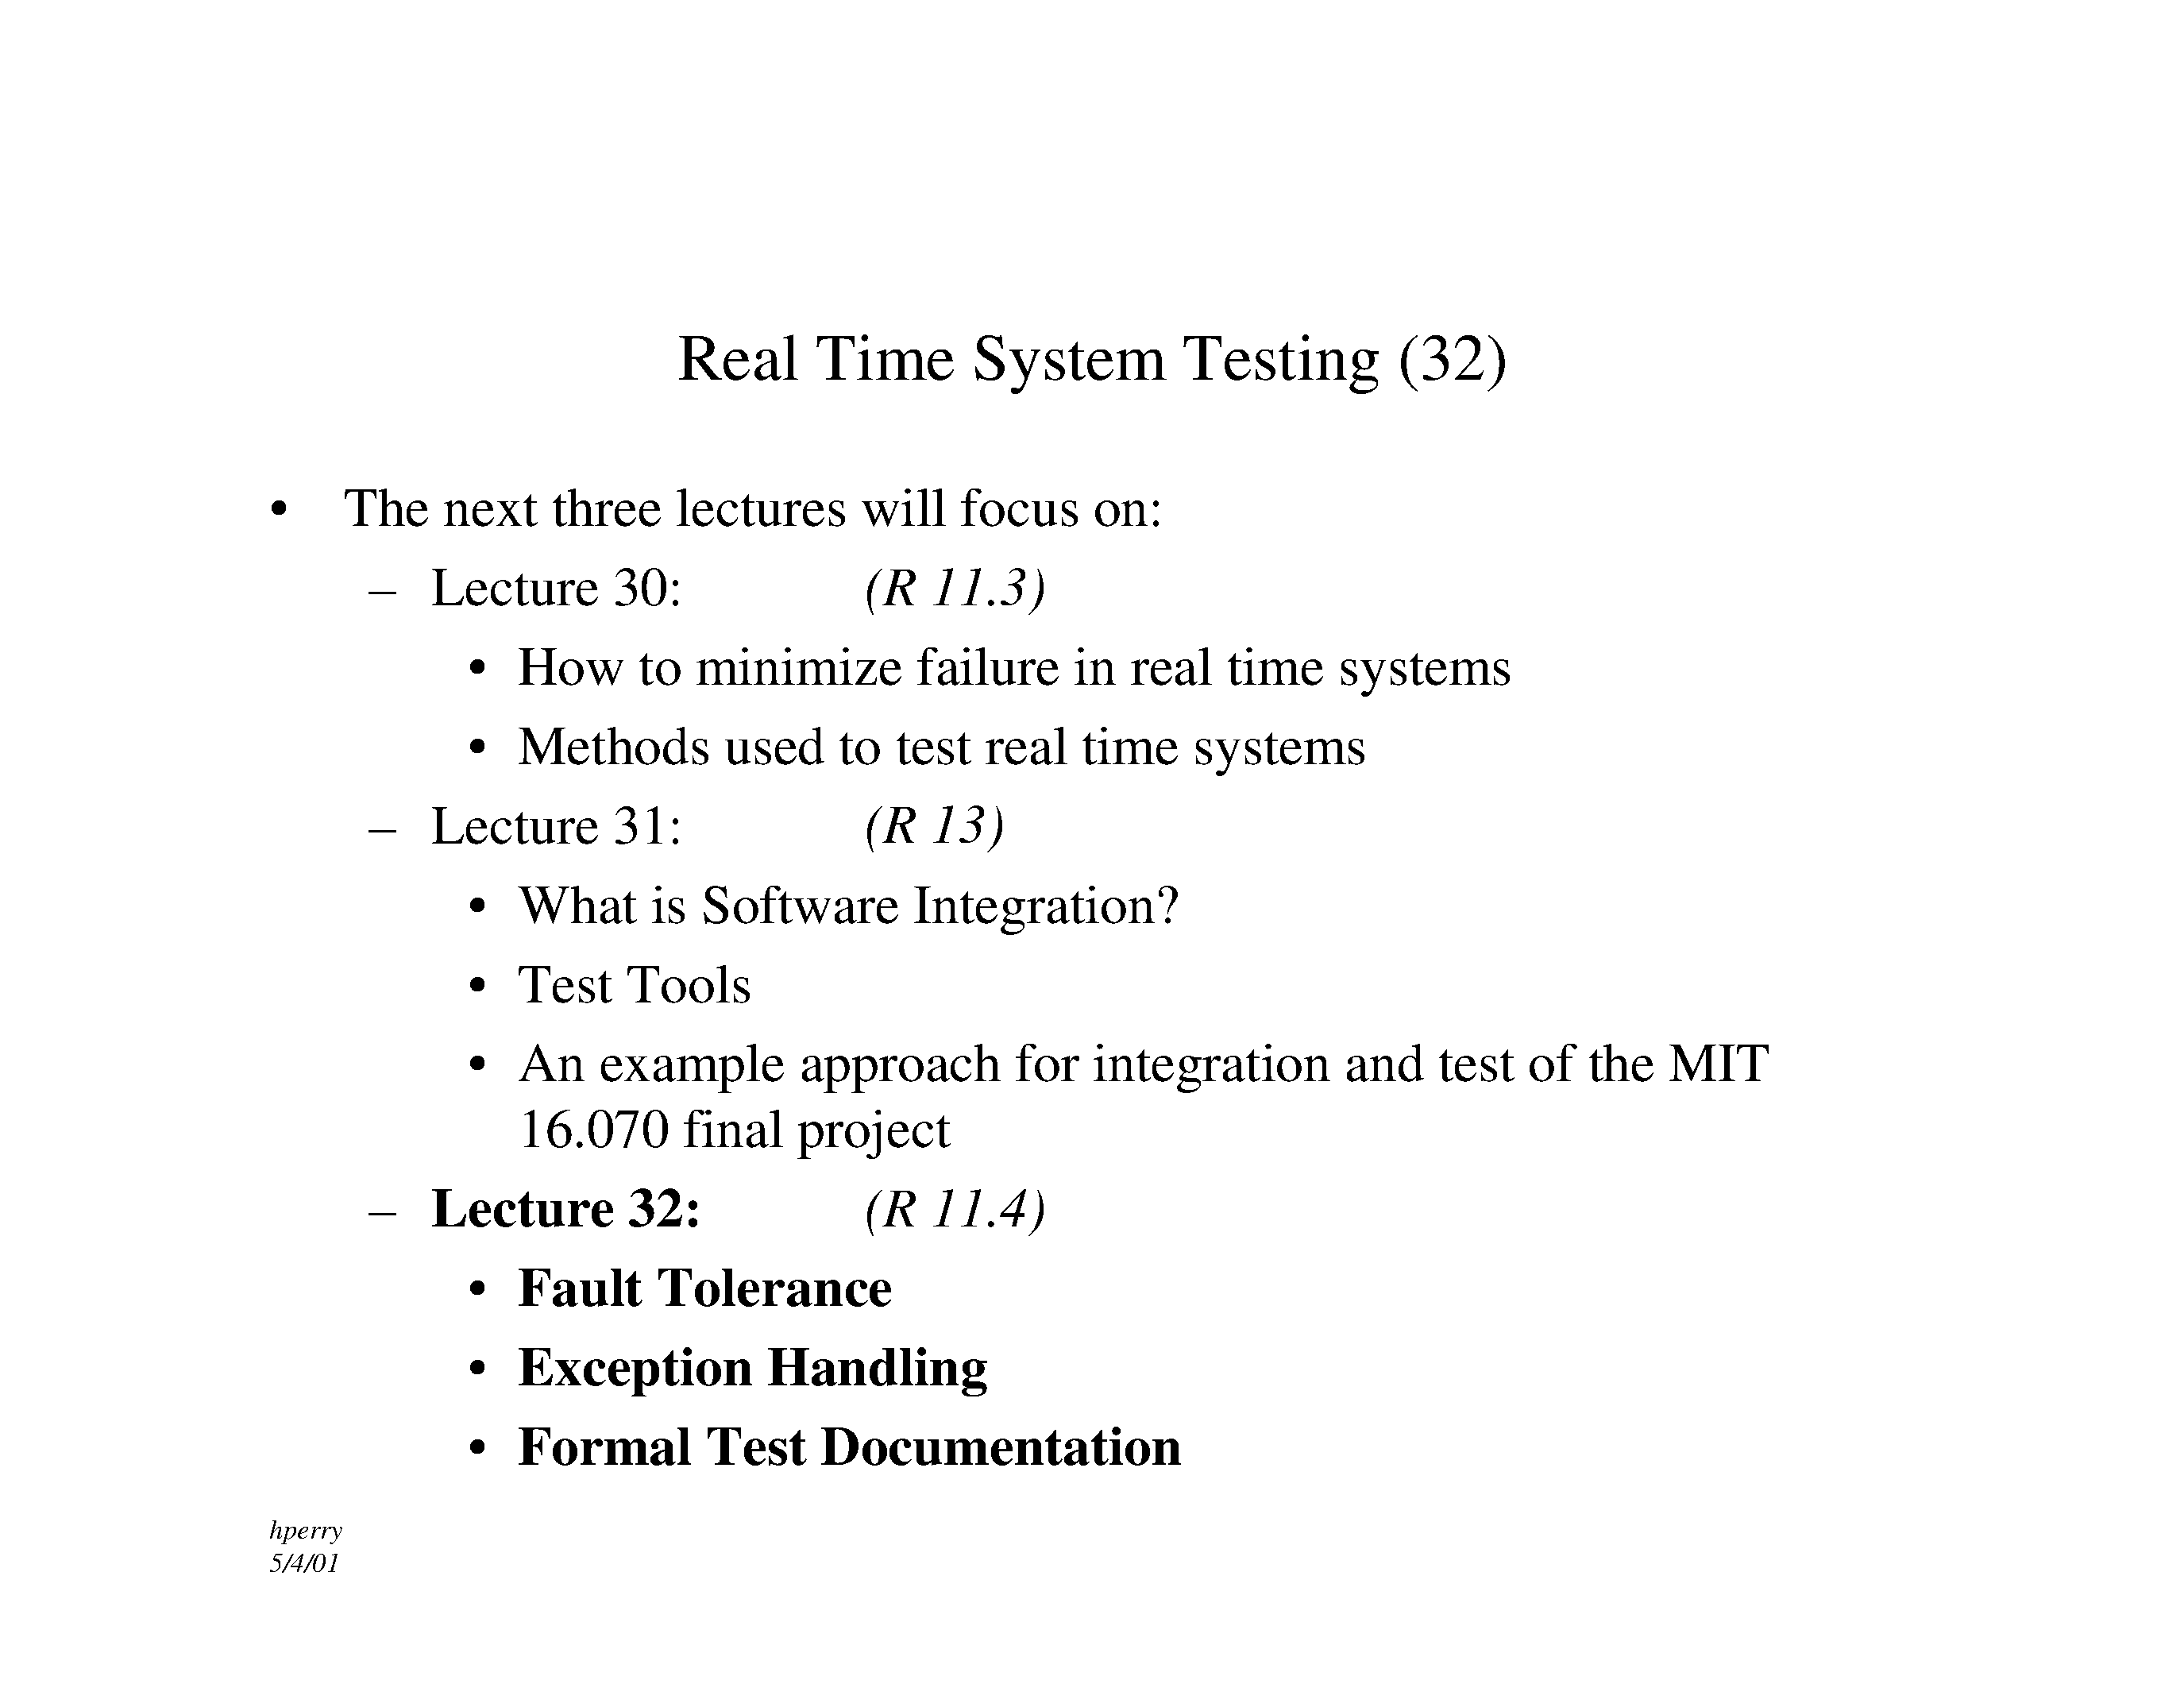 Datasheet TL32 - Real Time System Testing MIT 16.070 Lecture 32 page 2